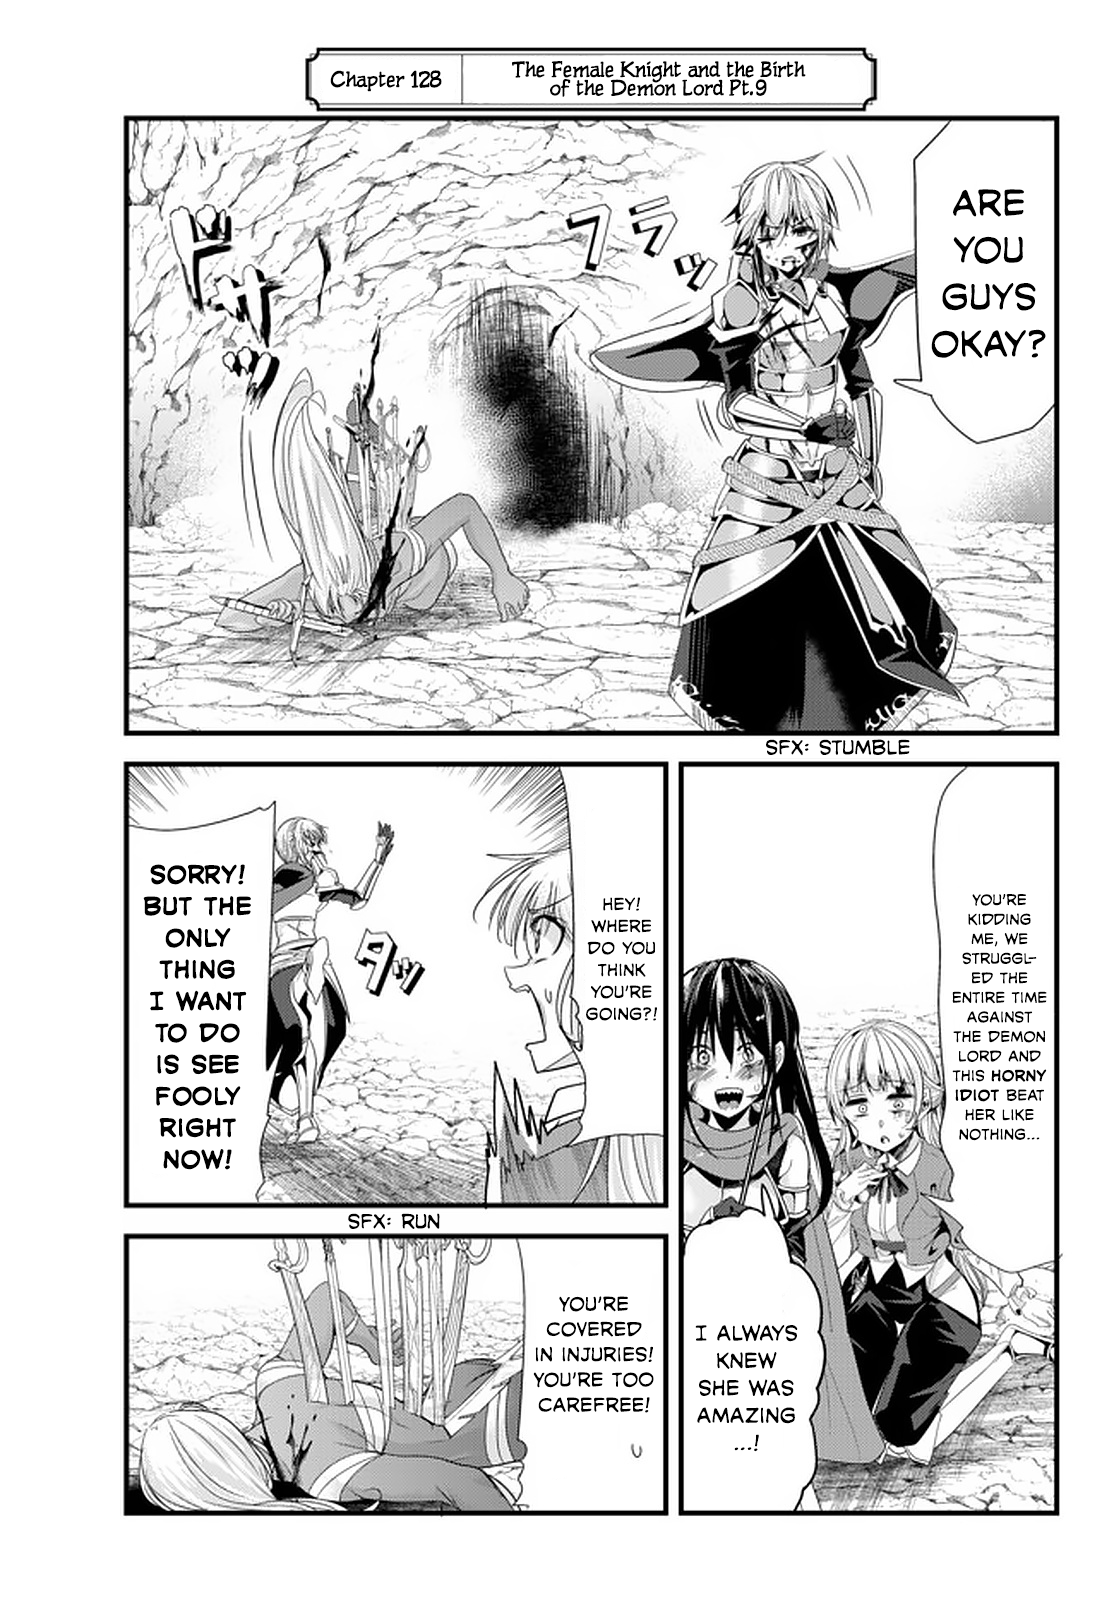 A Story About Treating a Female Knight, Who Has Never Been Treated as a Woman, as a Woman - Chapter 128 Page 1